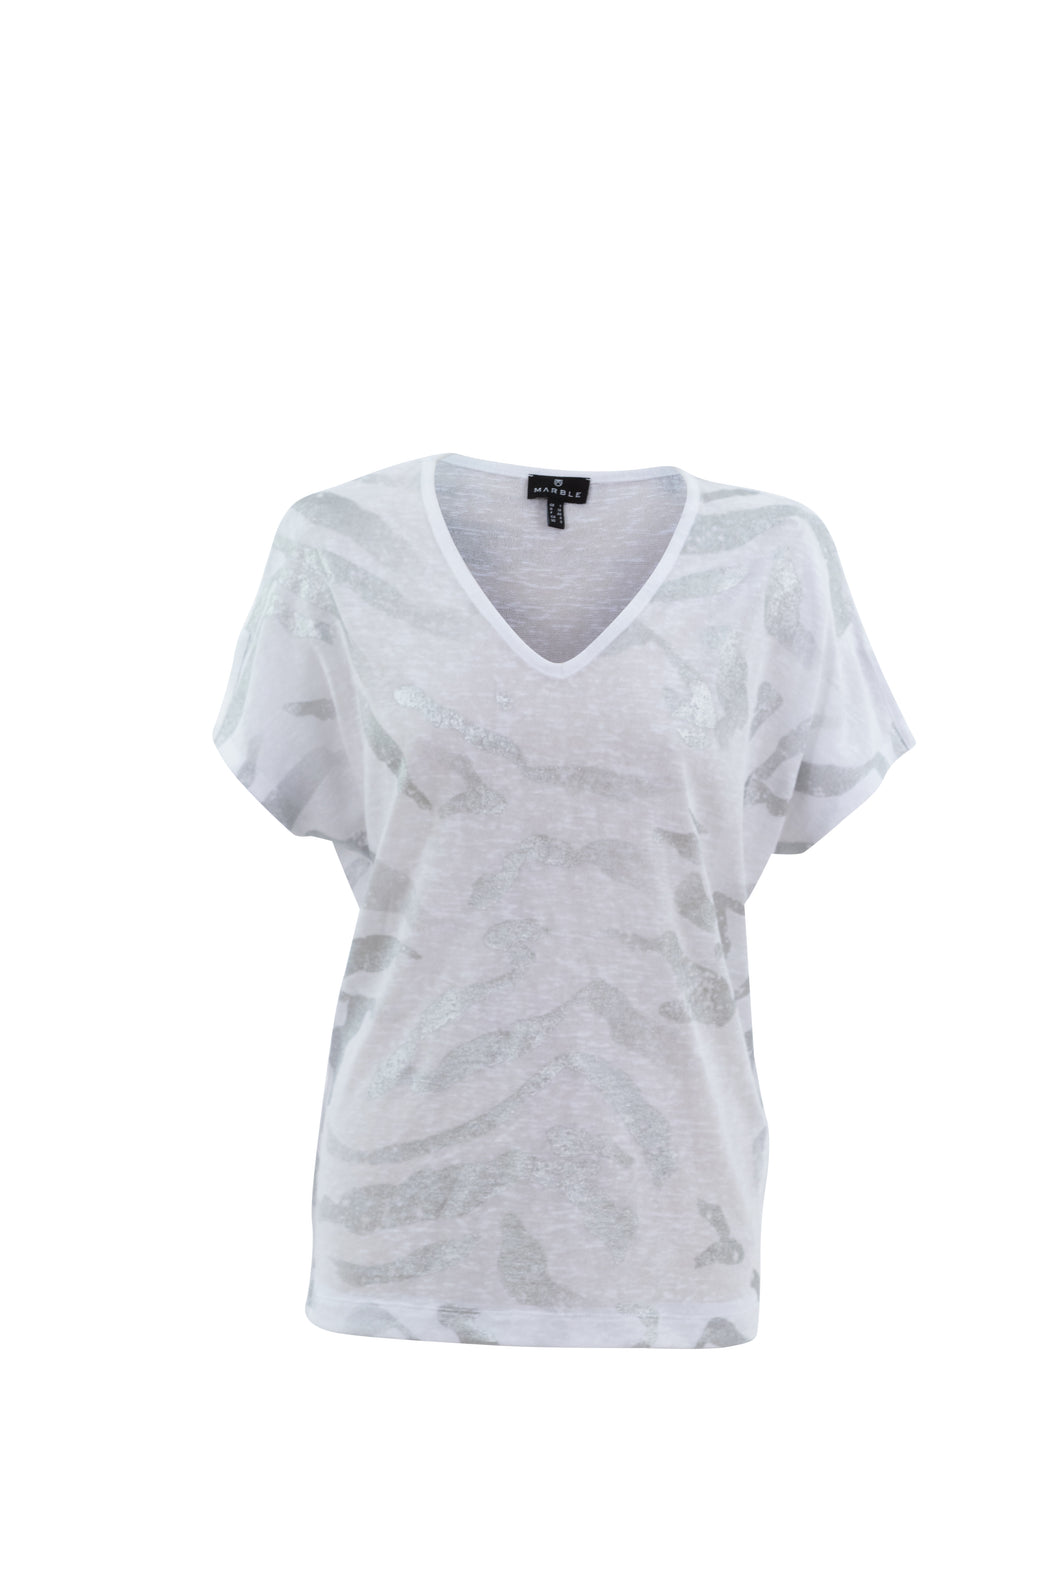 Marble - 7371 - TOP